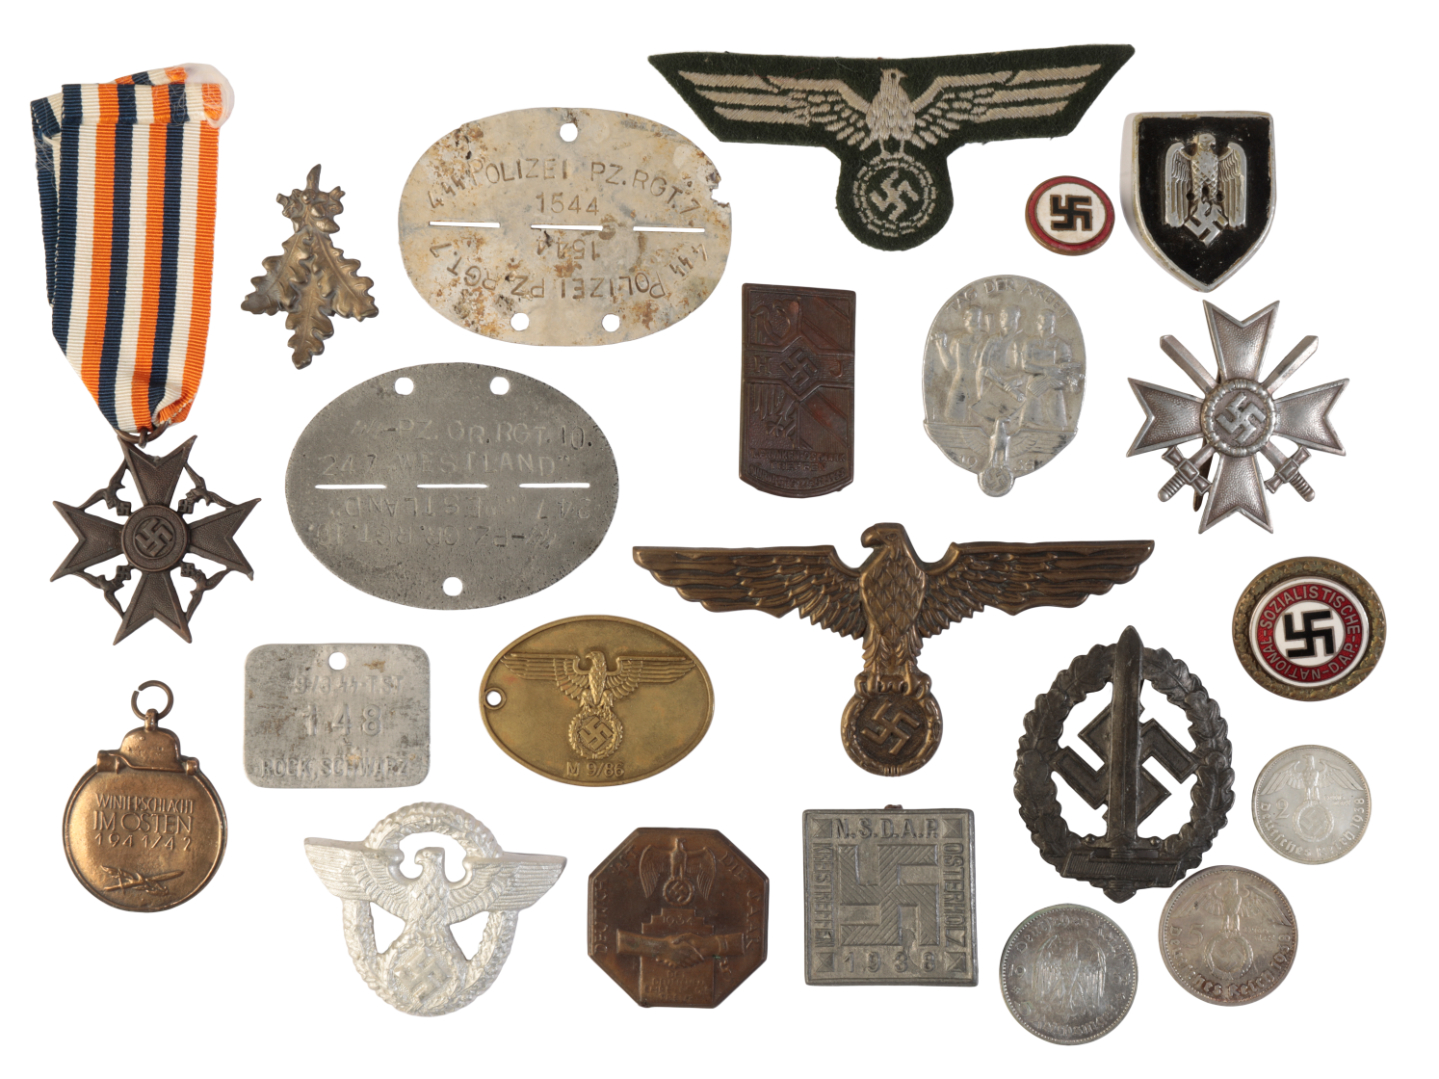 A LARGE COLLECTION OF GERMAN BADGES